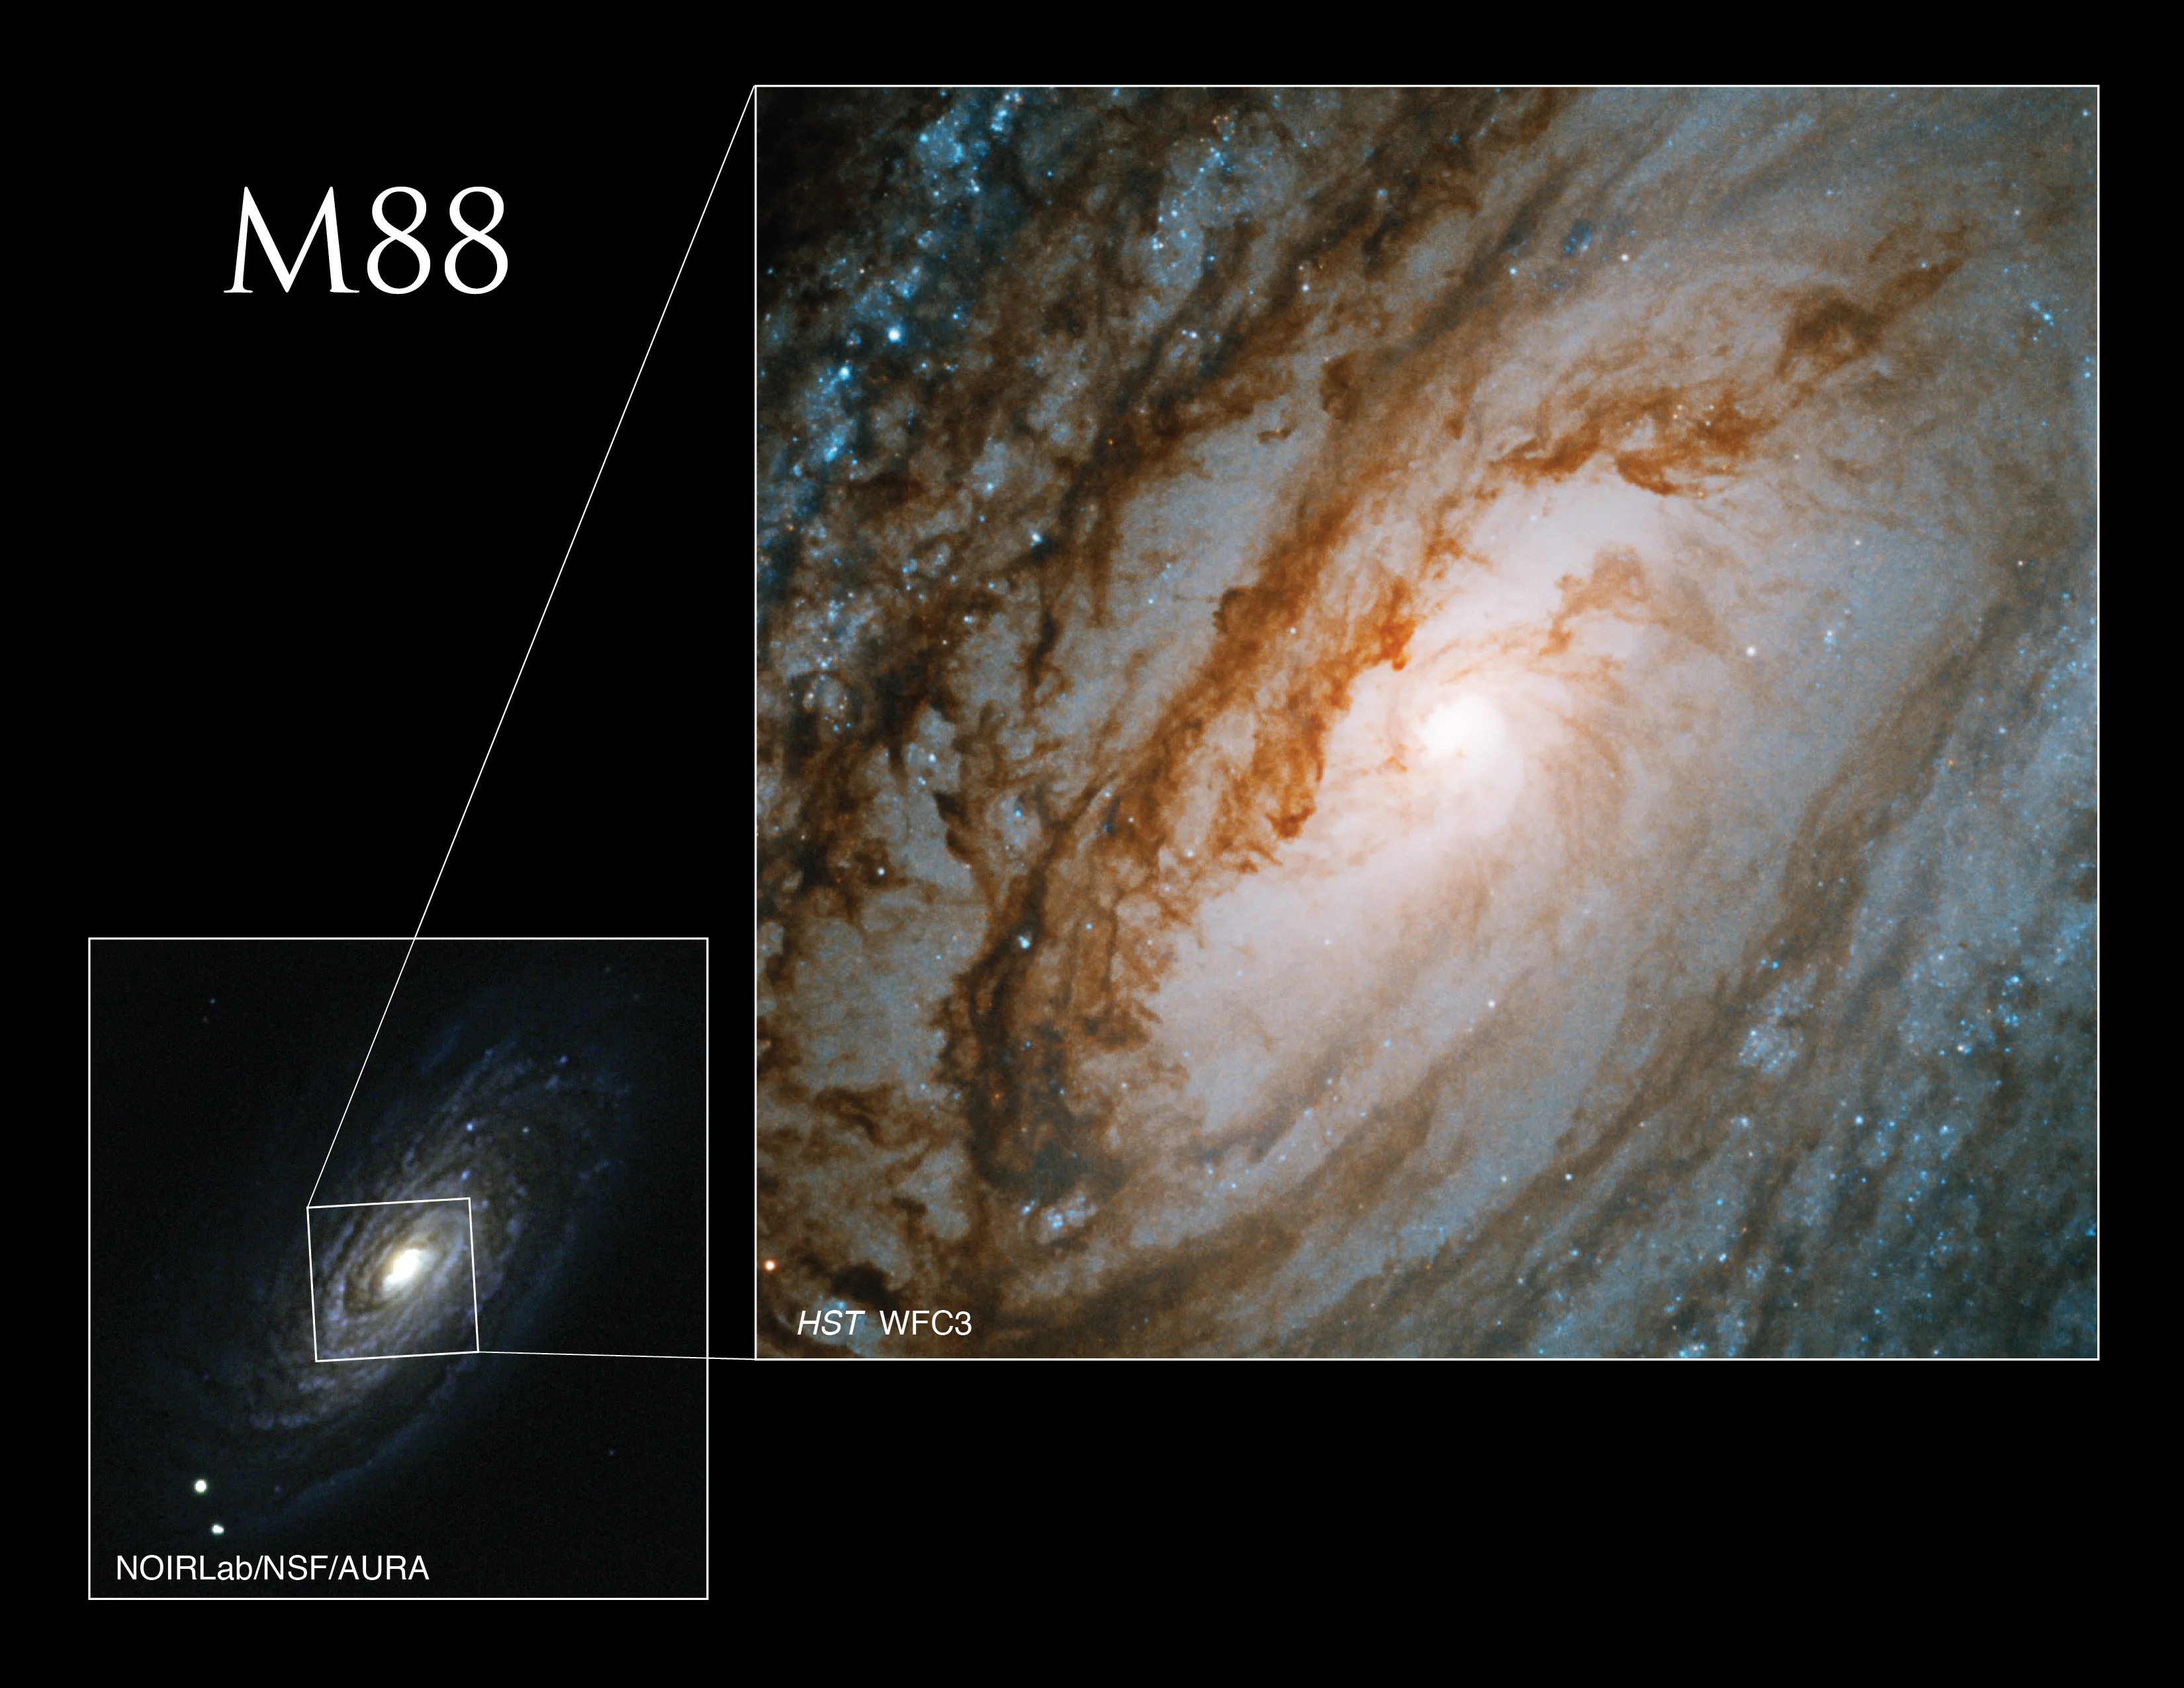 At the lower left, an image of the galaxy M88 is seen with a pulled out inset of the galaxy's core and surrounding spiral arms.